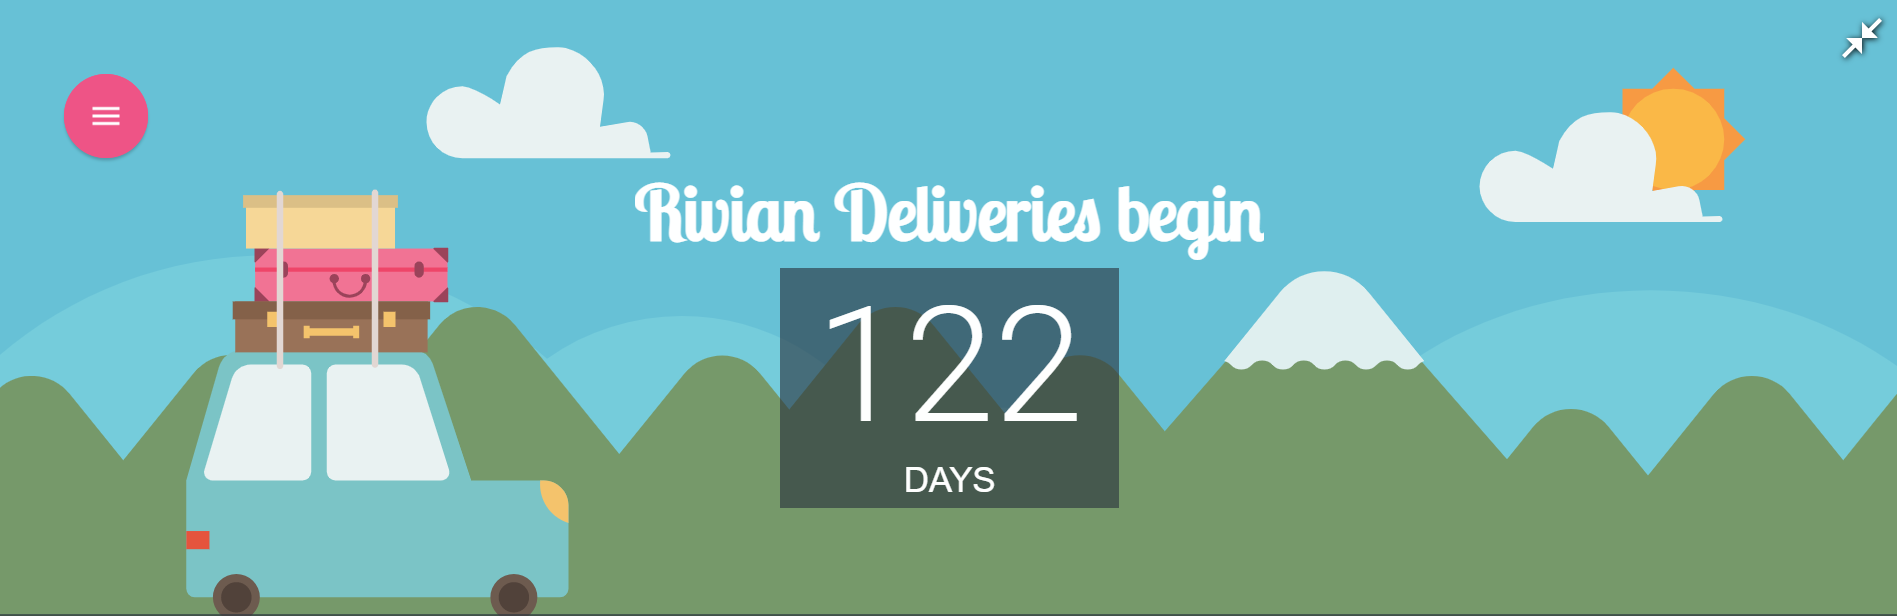 Rivian R1T R1S Countdown to the start of Rivian Deliveries Screenshot 2021-01-30 21.46.33